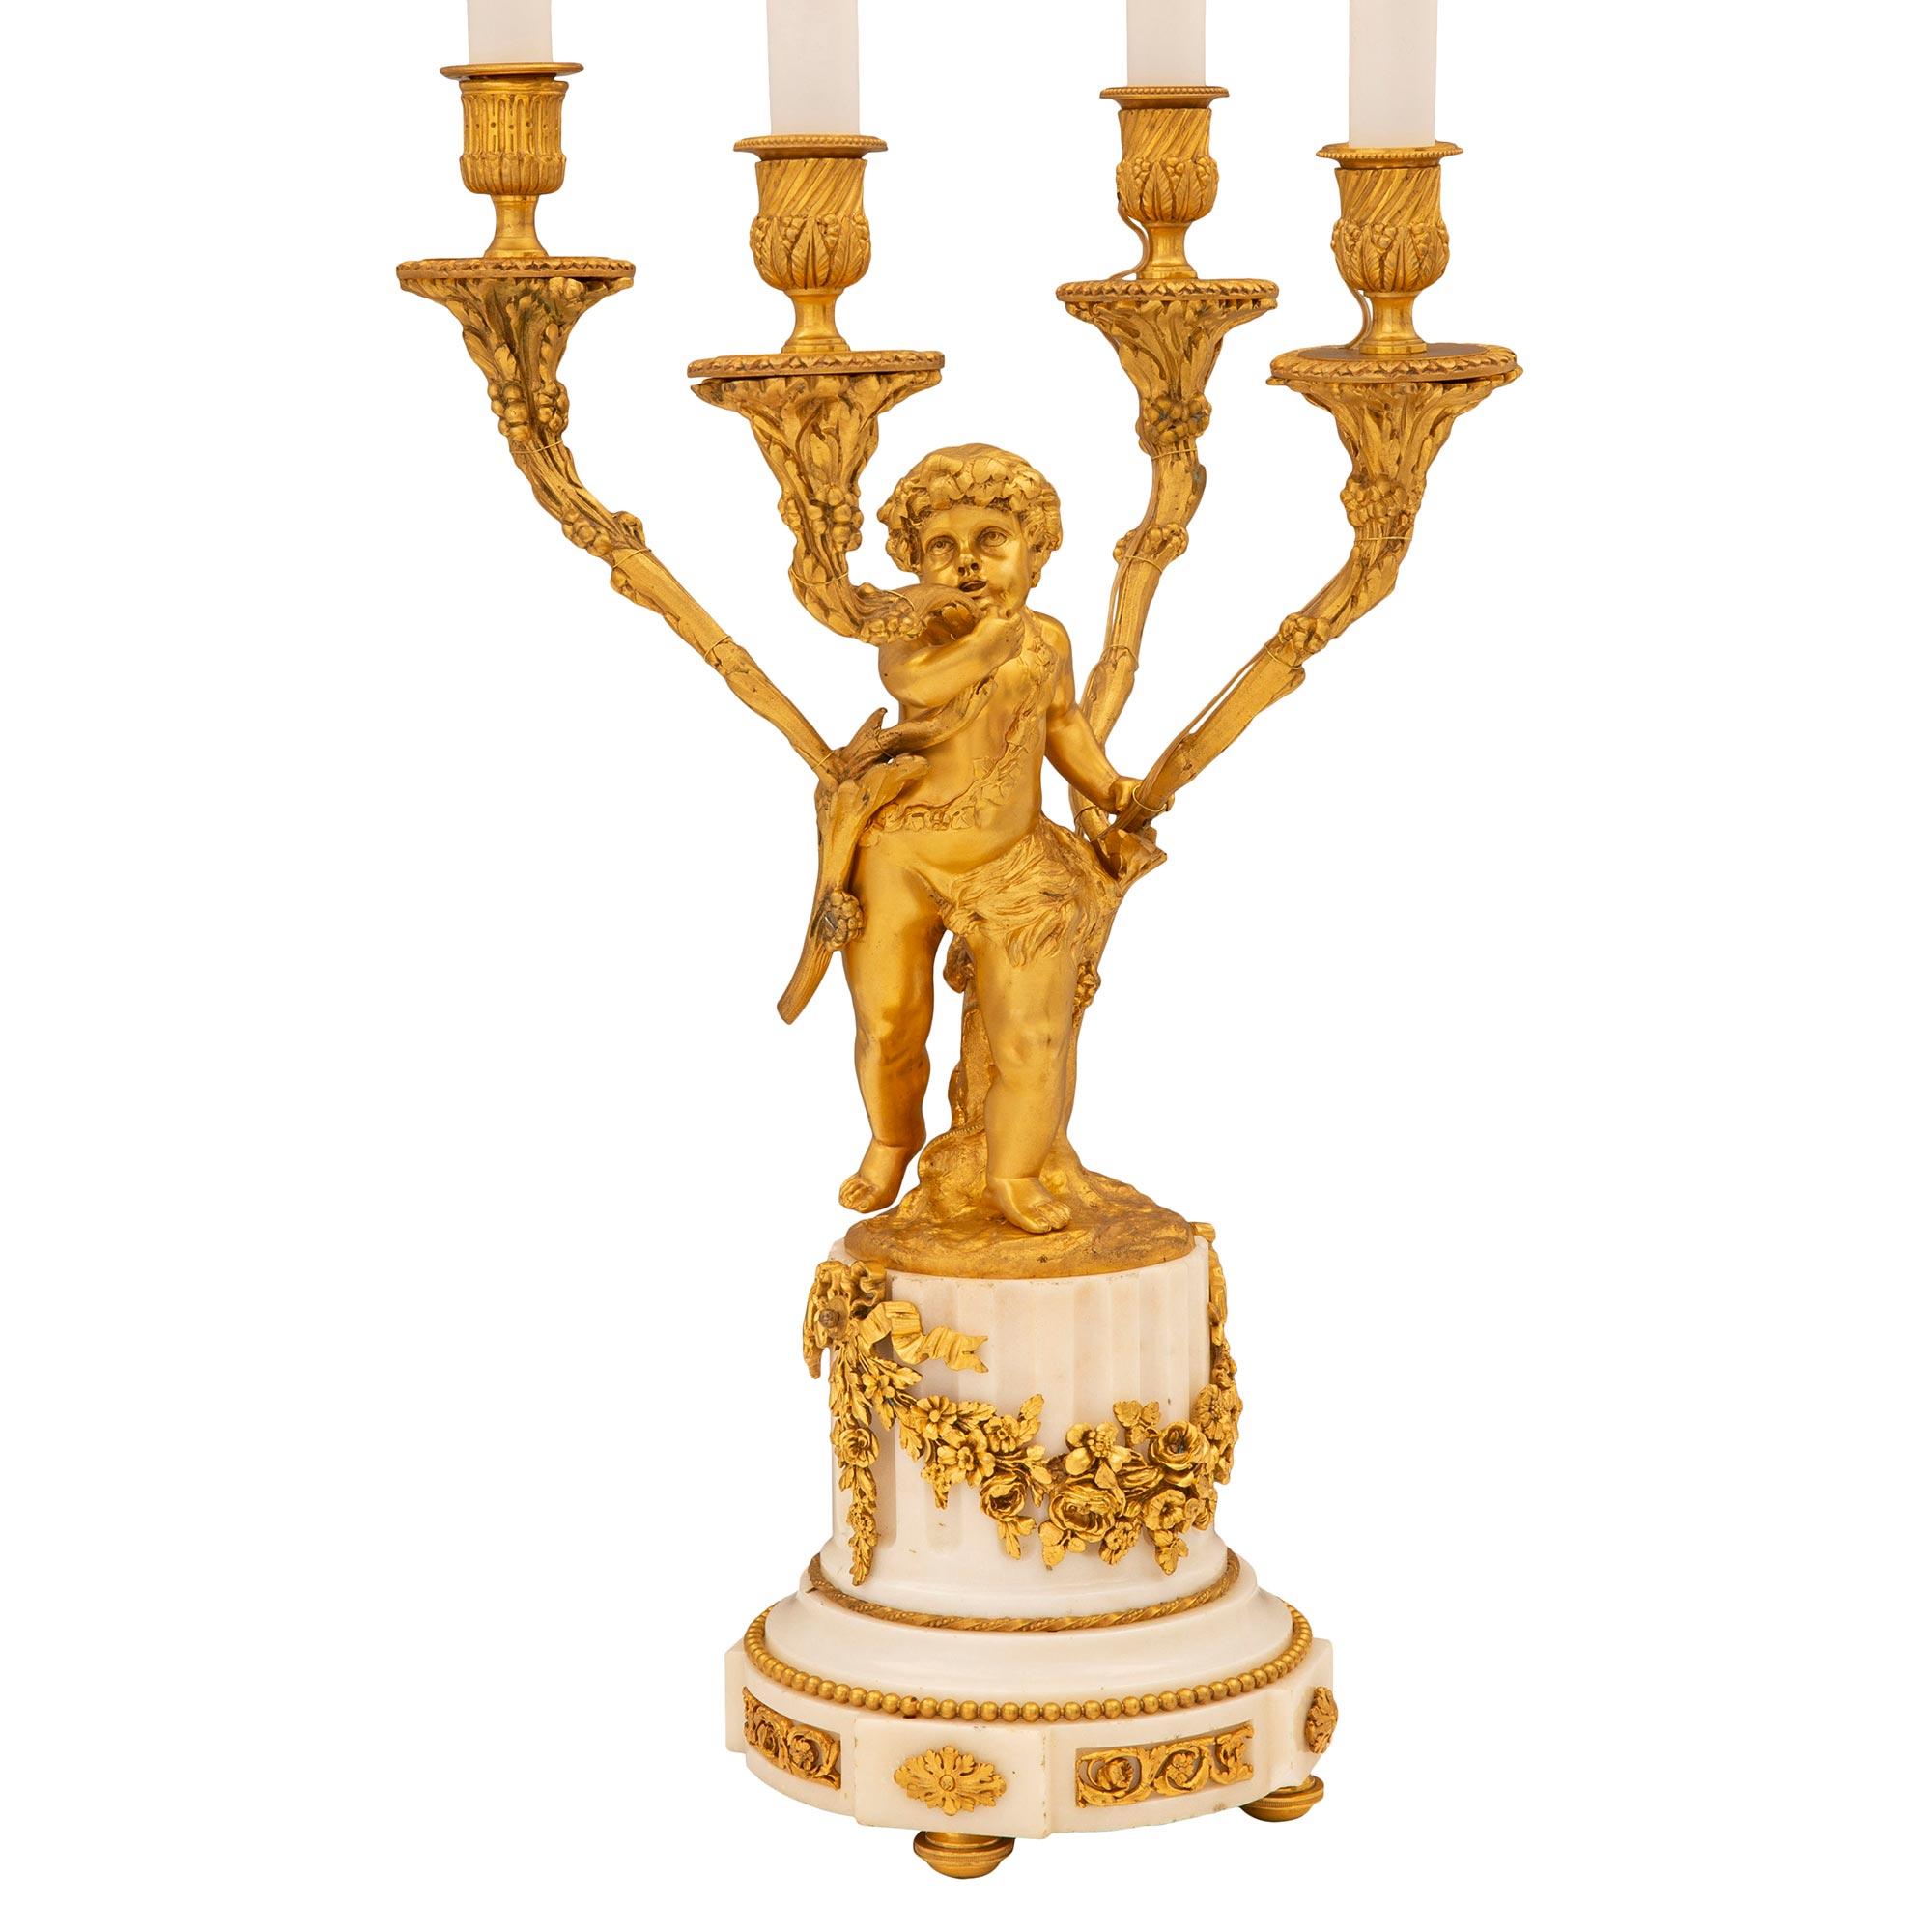 A charming and extremely elegant French 19th century Louis XVI st. ormolu and white Carrara marble candelabra lamp. The four arm lamp is raised by fine ormolu bun feet below the circular fluted white Carrara marble base with a lovely mottled band